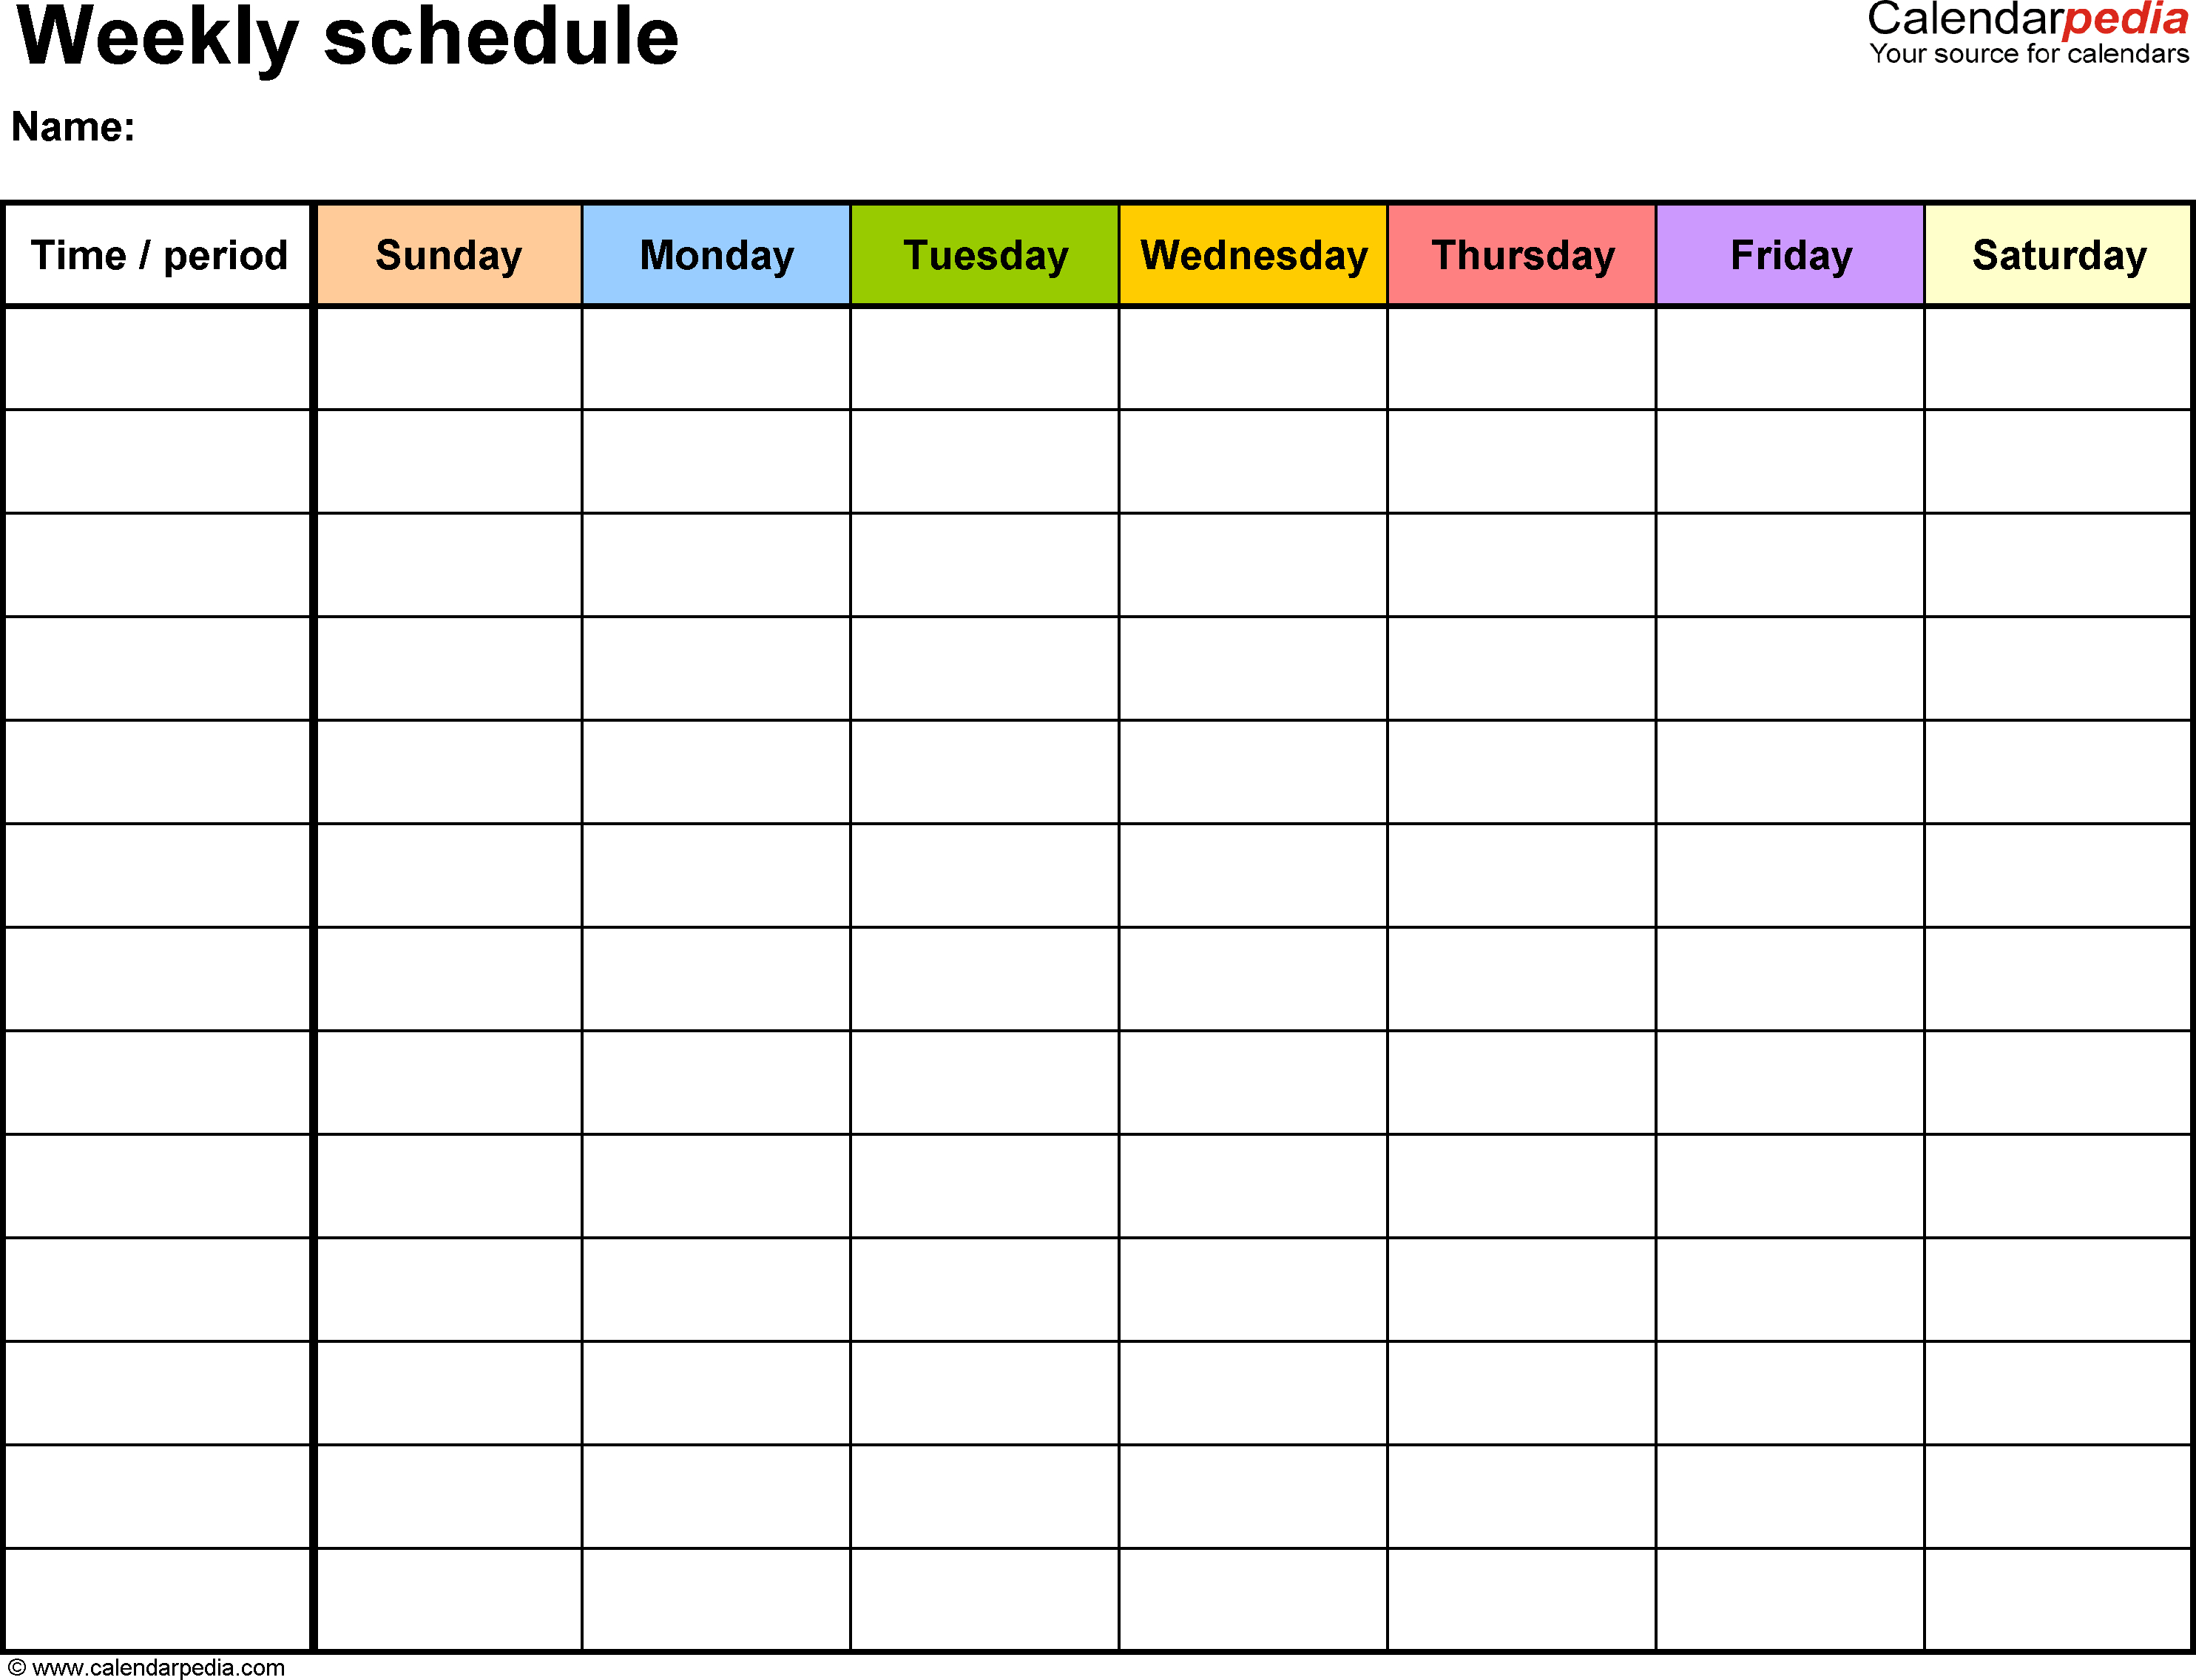 Free Weekly Schedule Templates For Pdf - 18 Templates - Free Printable Schedule